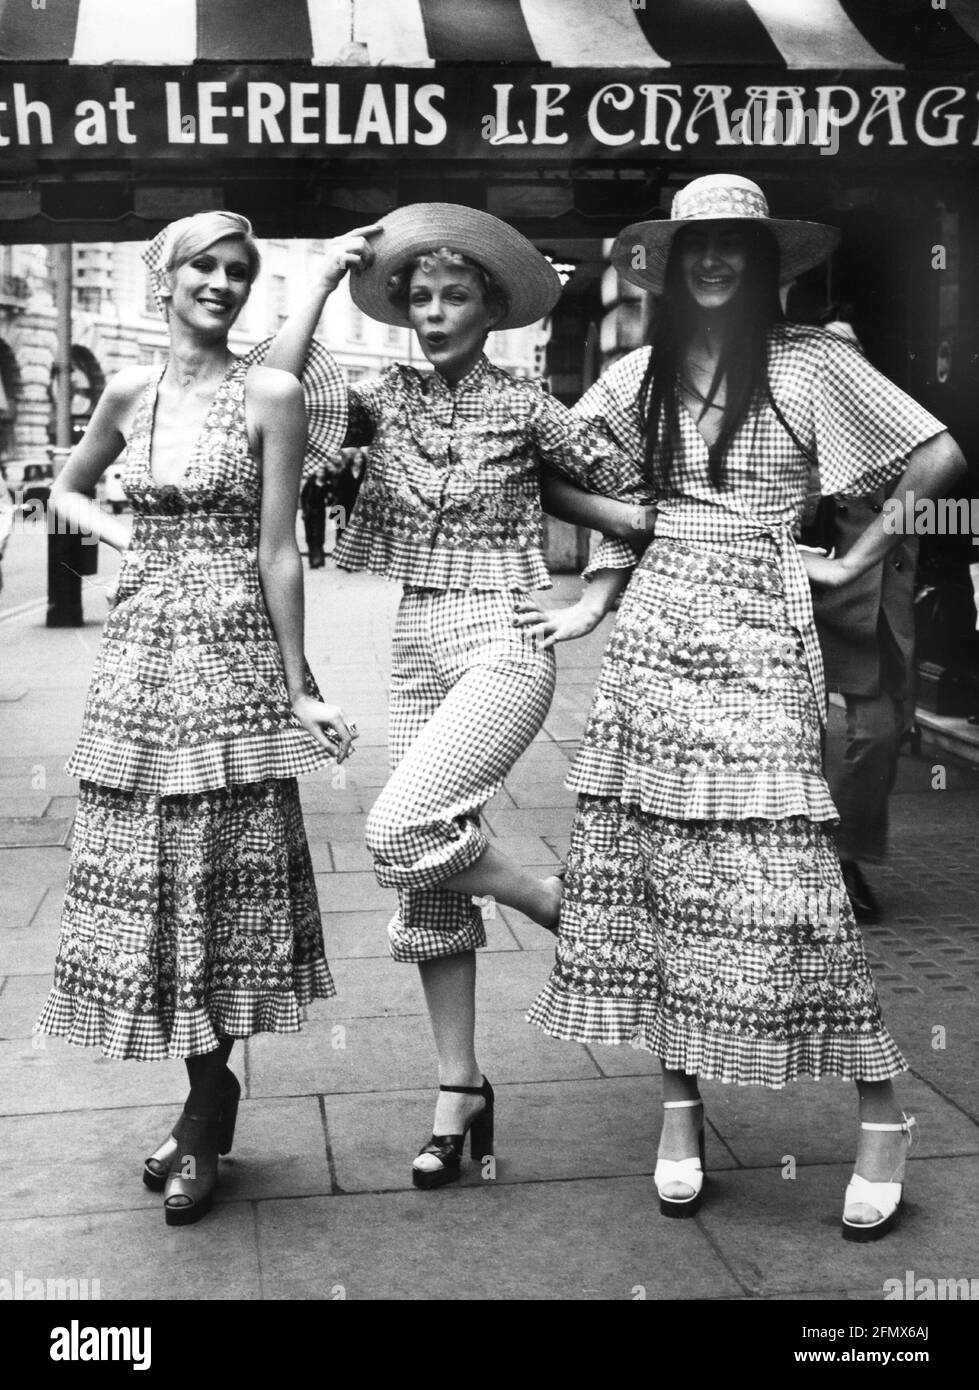 fashion, 1970s, ladies' fashion, 3 models with plateau shoes and colourful patterned dresses, London, ADDITIONAL-RIGHTS-CLEARANCE-INFO-NOT-AVAILABLE Stock Photo